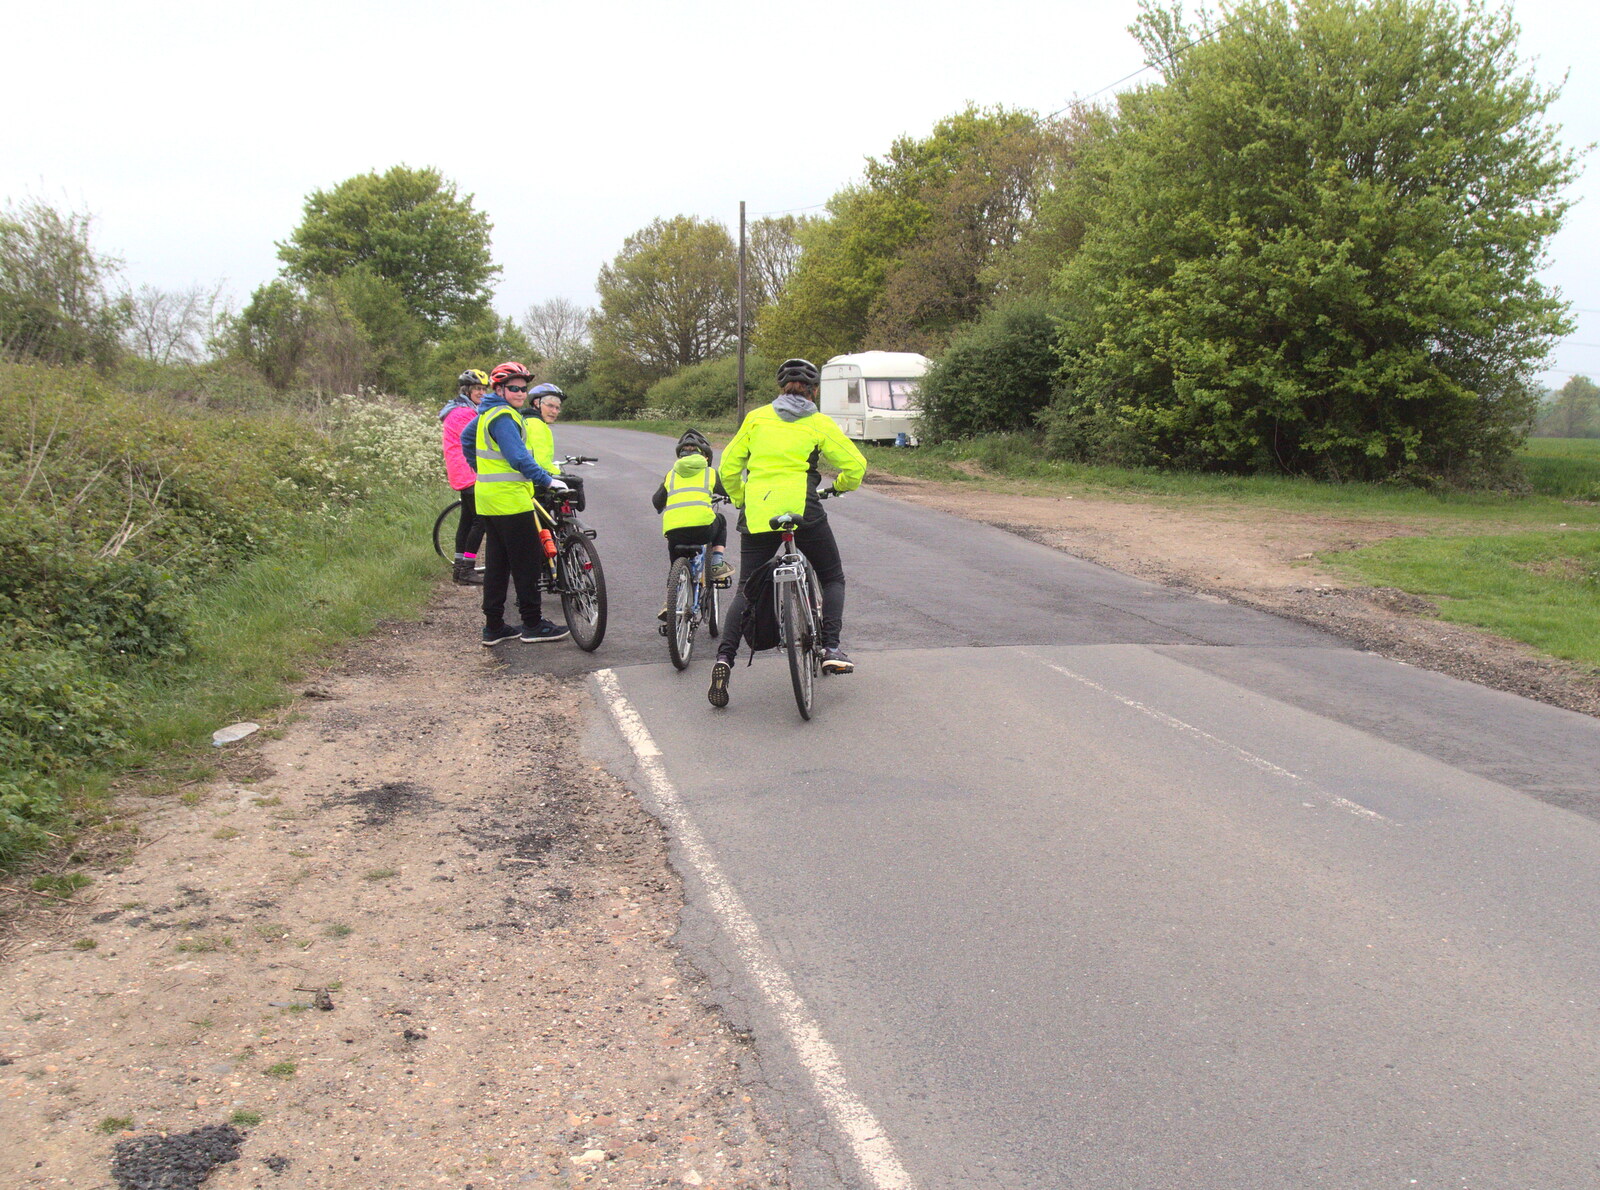 The group heads off again from The Last-Ever BSCC Weekend Away Bike Ride, Thaxted, Essex - 6th May 2017